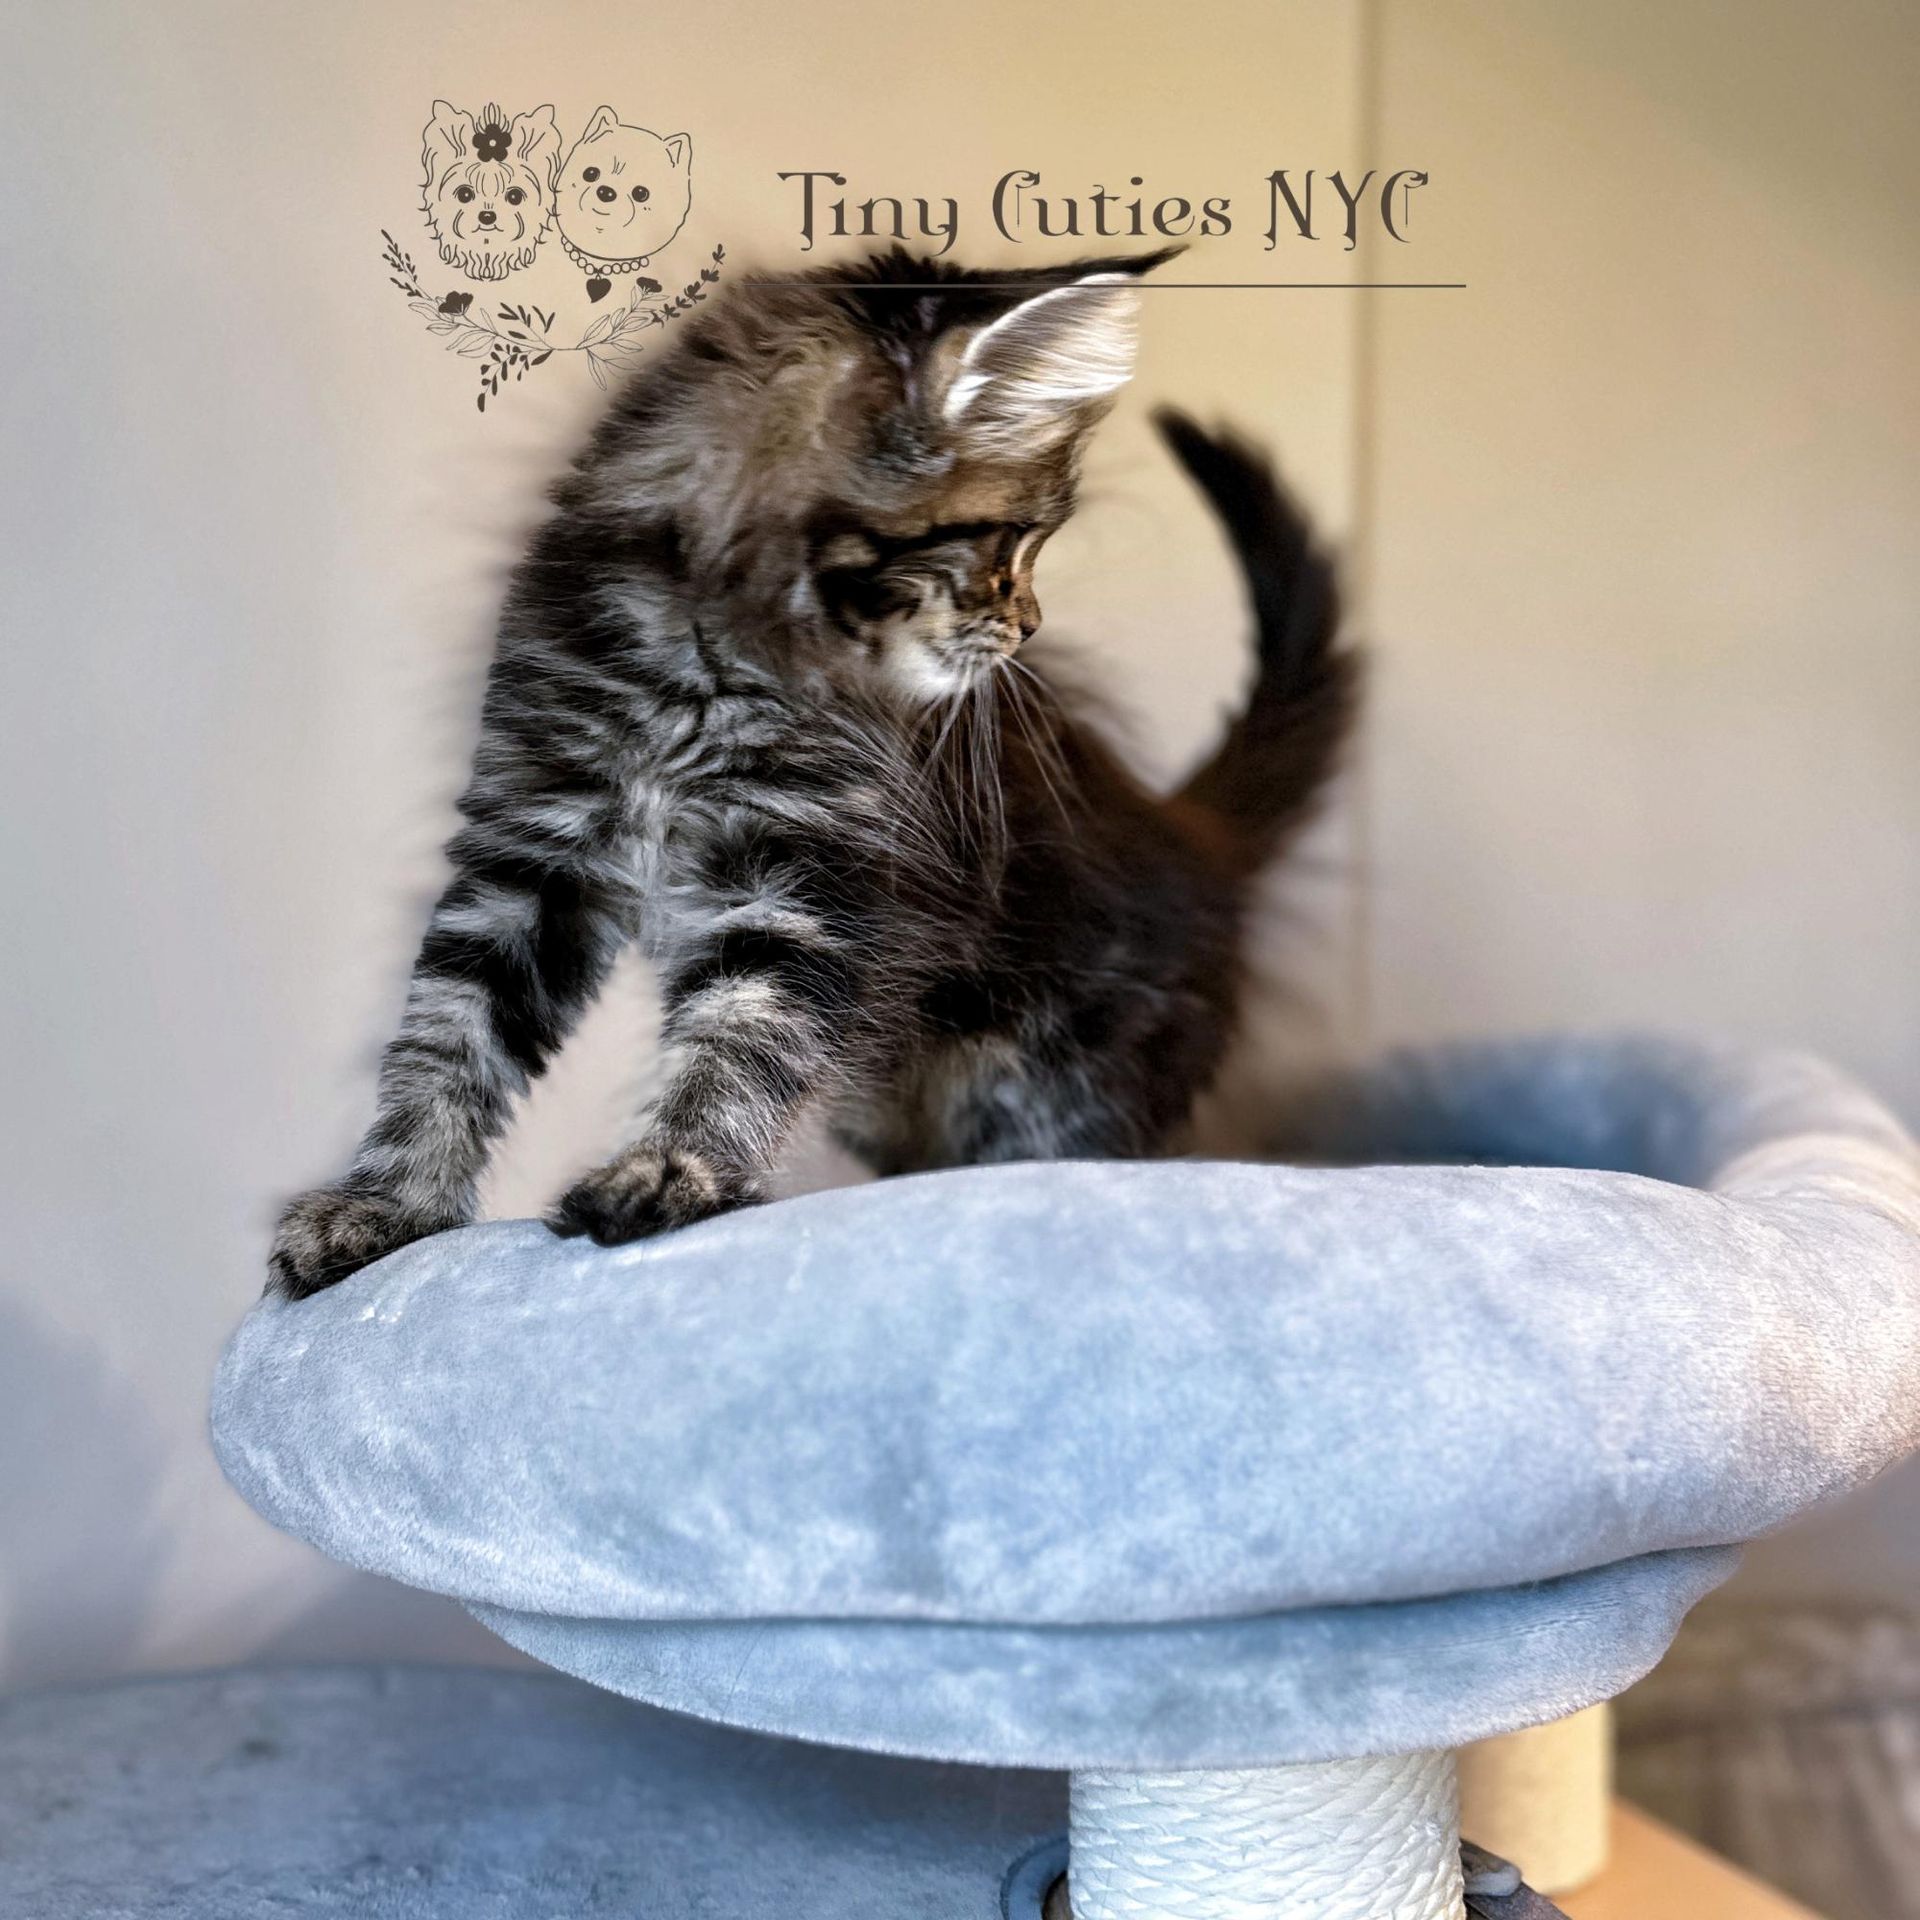 Maine Coon — Astoria Queens, NY — ﻿Tiny Cuties NYC